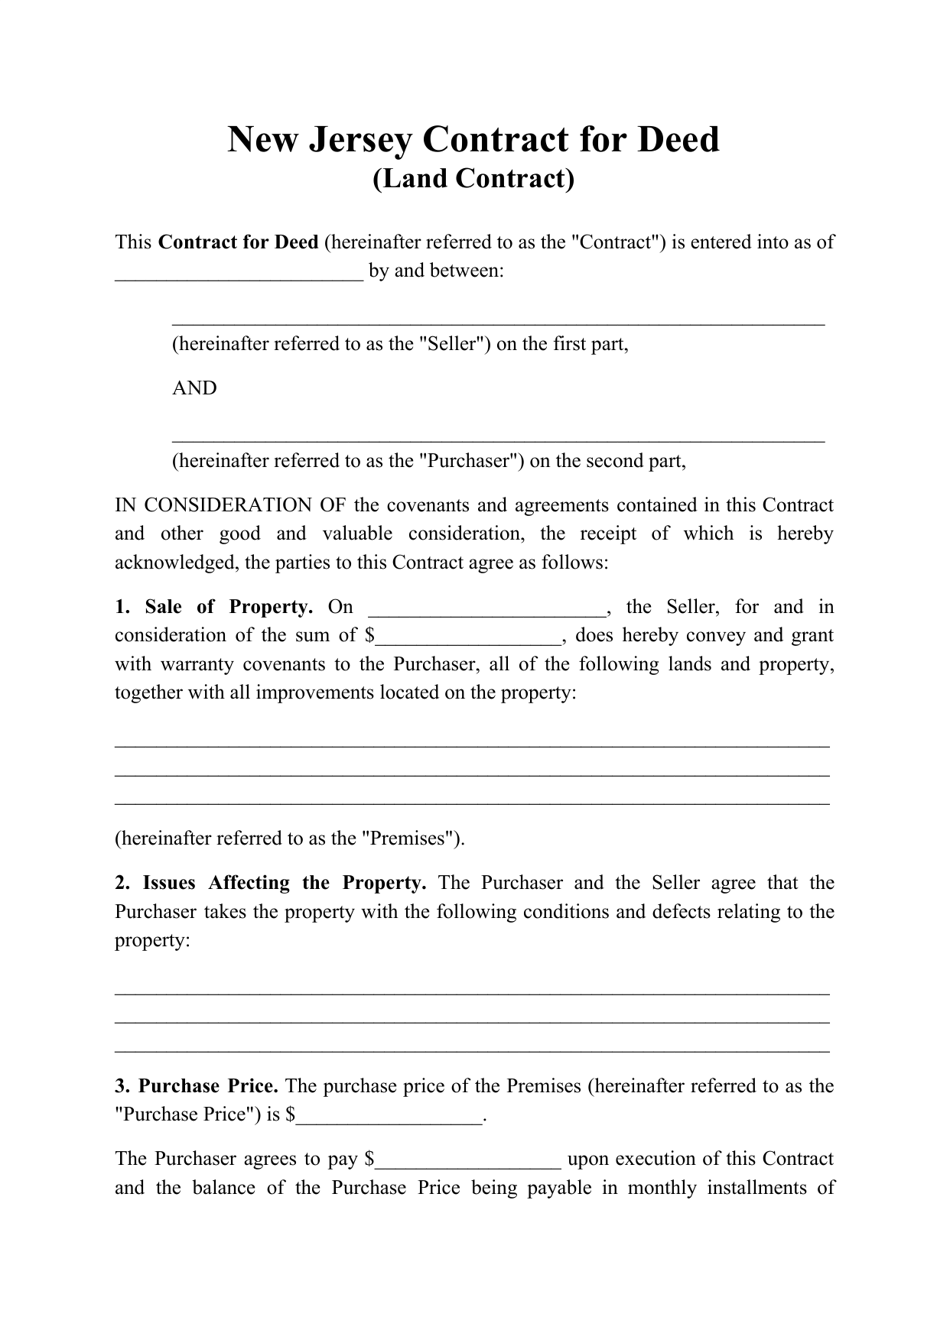 Contract for Deed (Land Contract) - New Jersey, Page 1